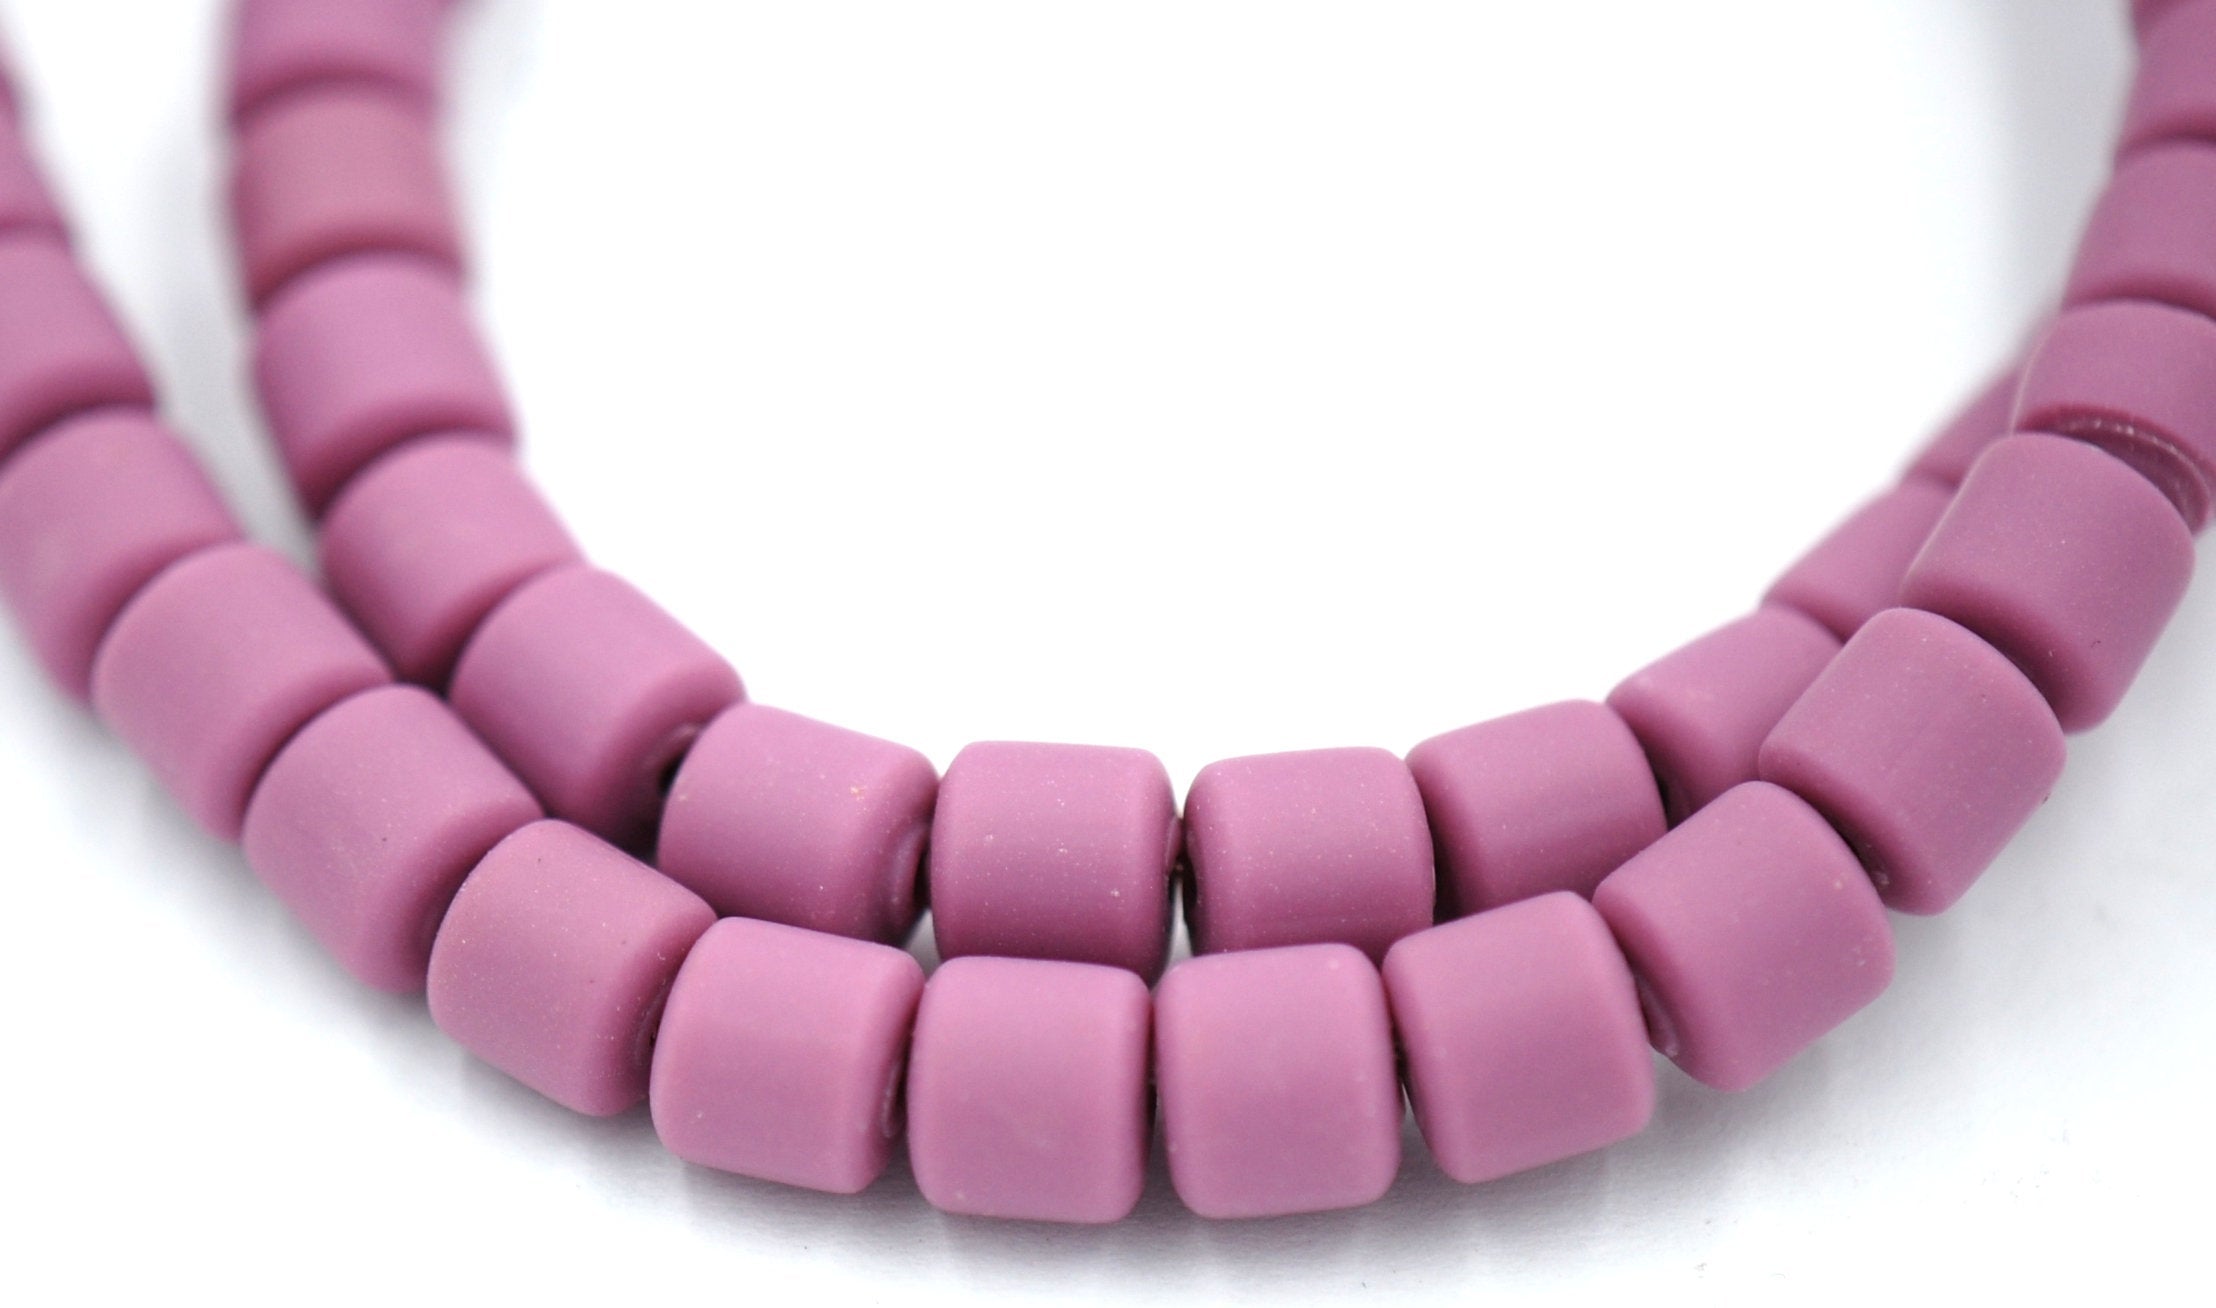 Column Handmade Polymer Clay Bead Spacers, Pastel Bright Assorted Color, FULL STRAND